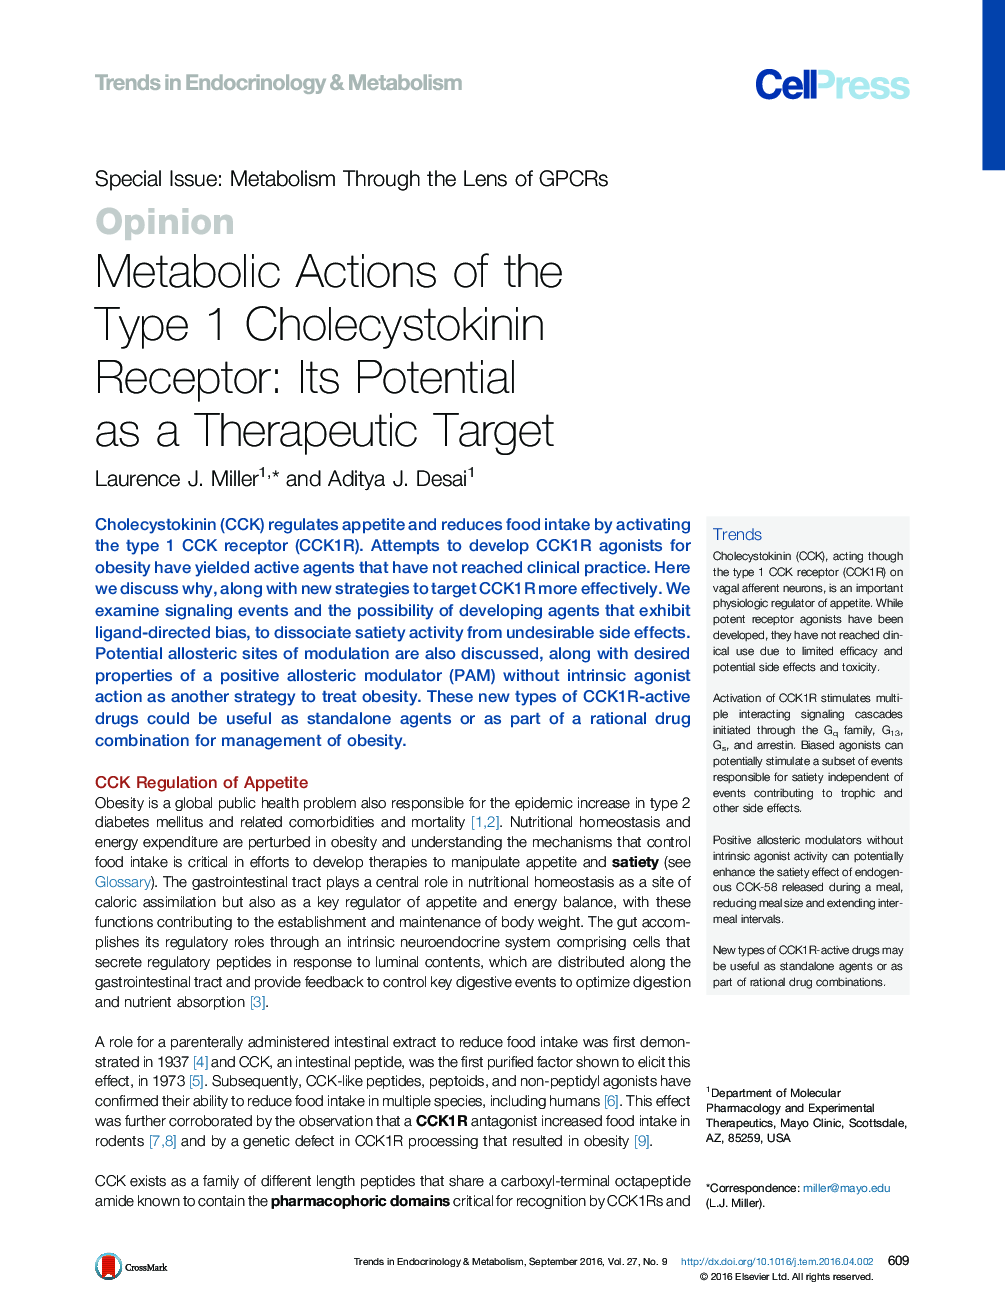 Metabolic Actions of the Type 1 Cholecystokinin Receptor: Its Potential as a Therapeutic Target